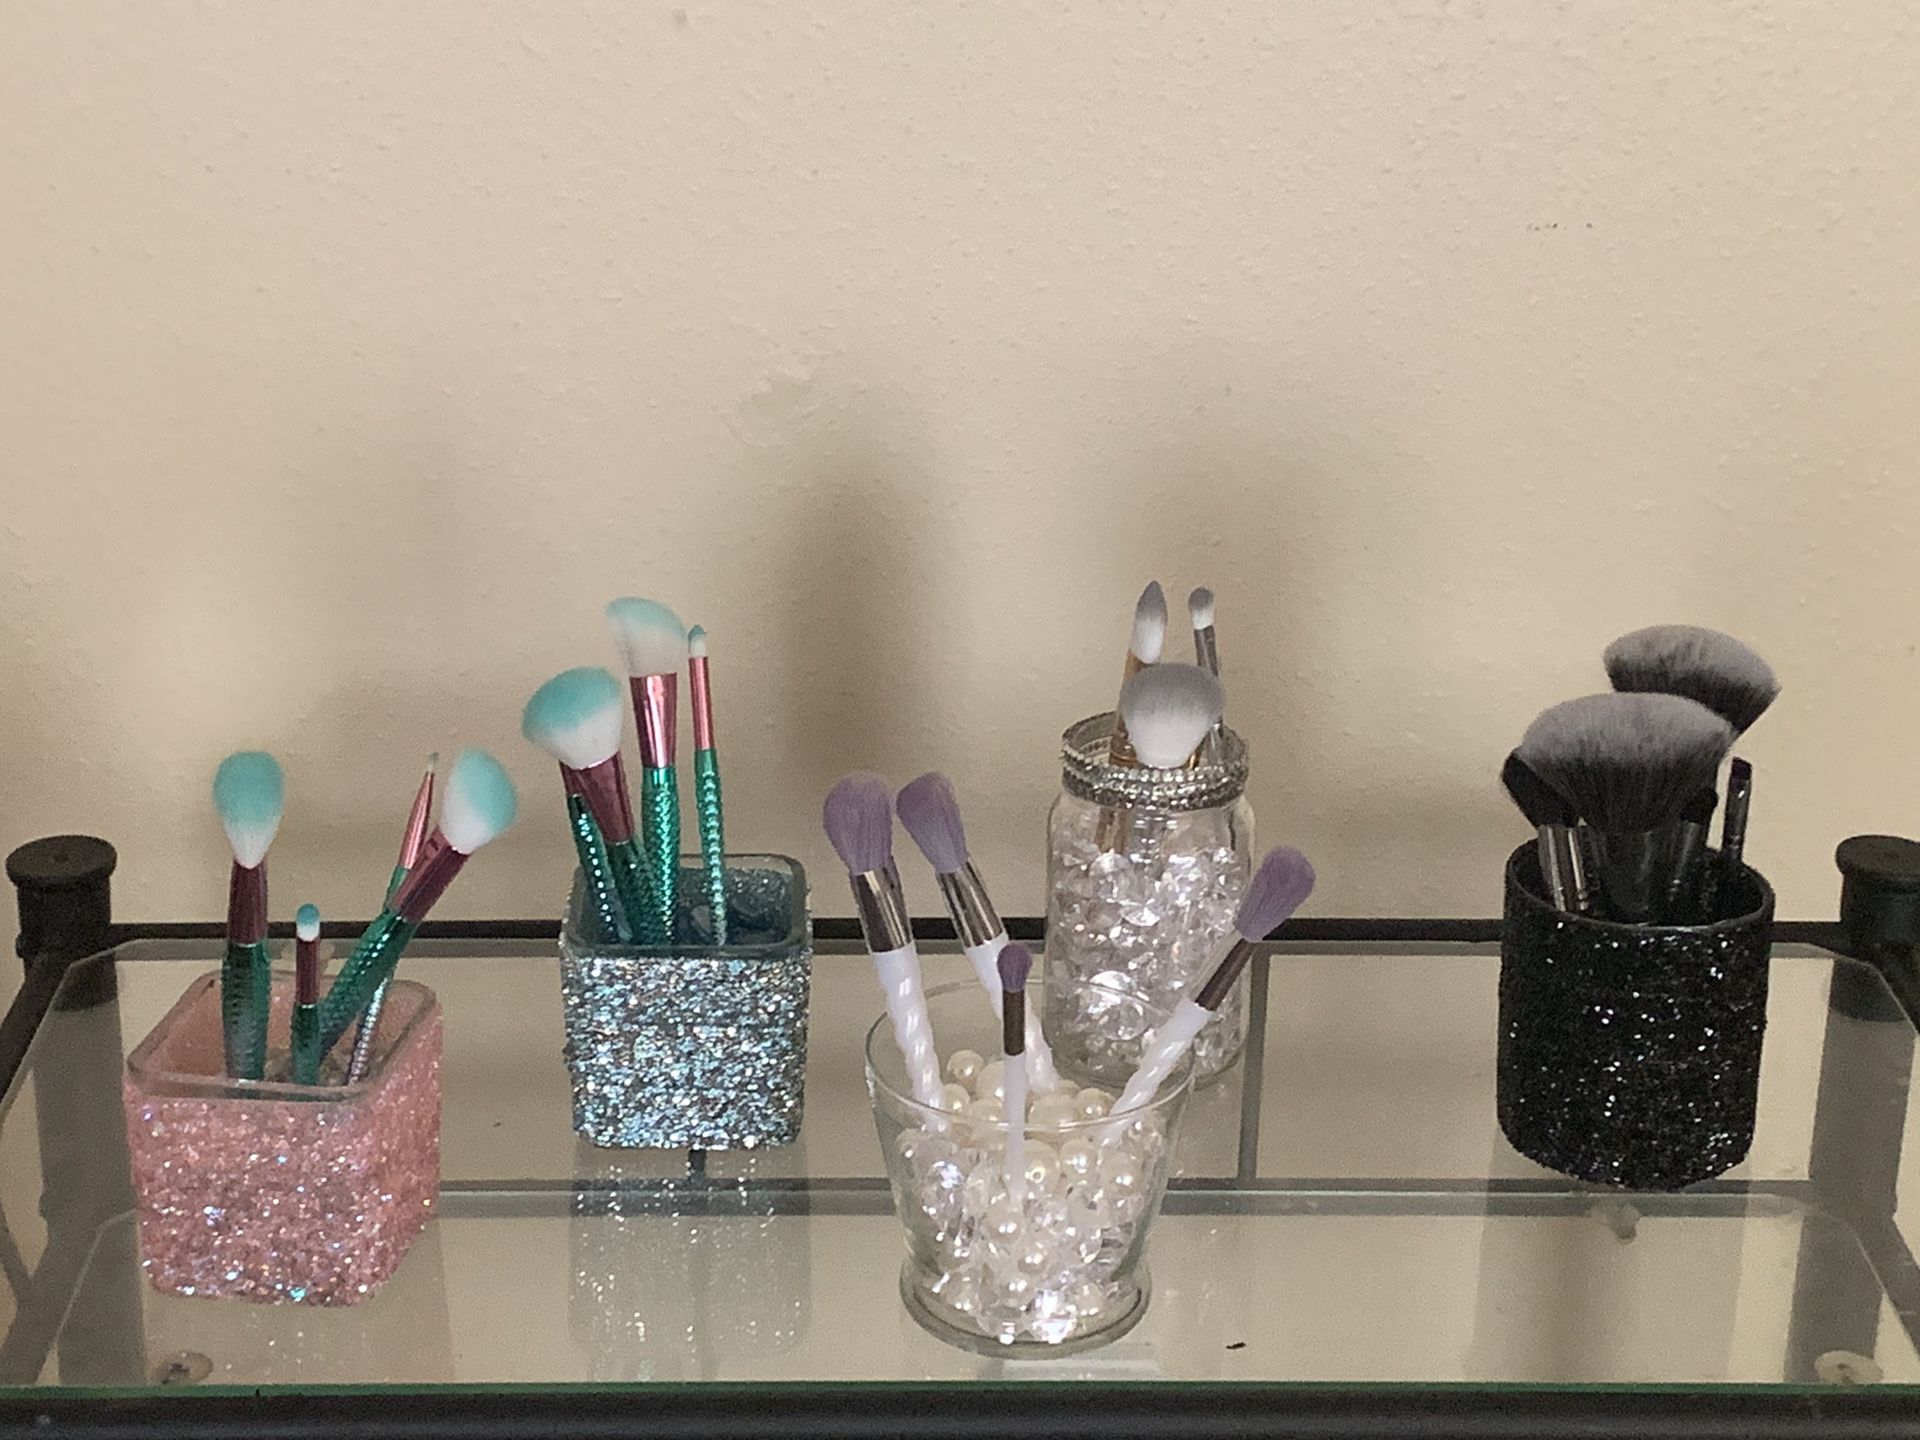 Make up brushes and containers